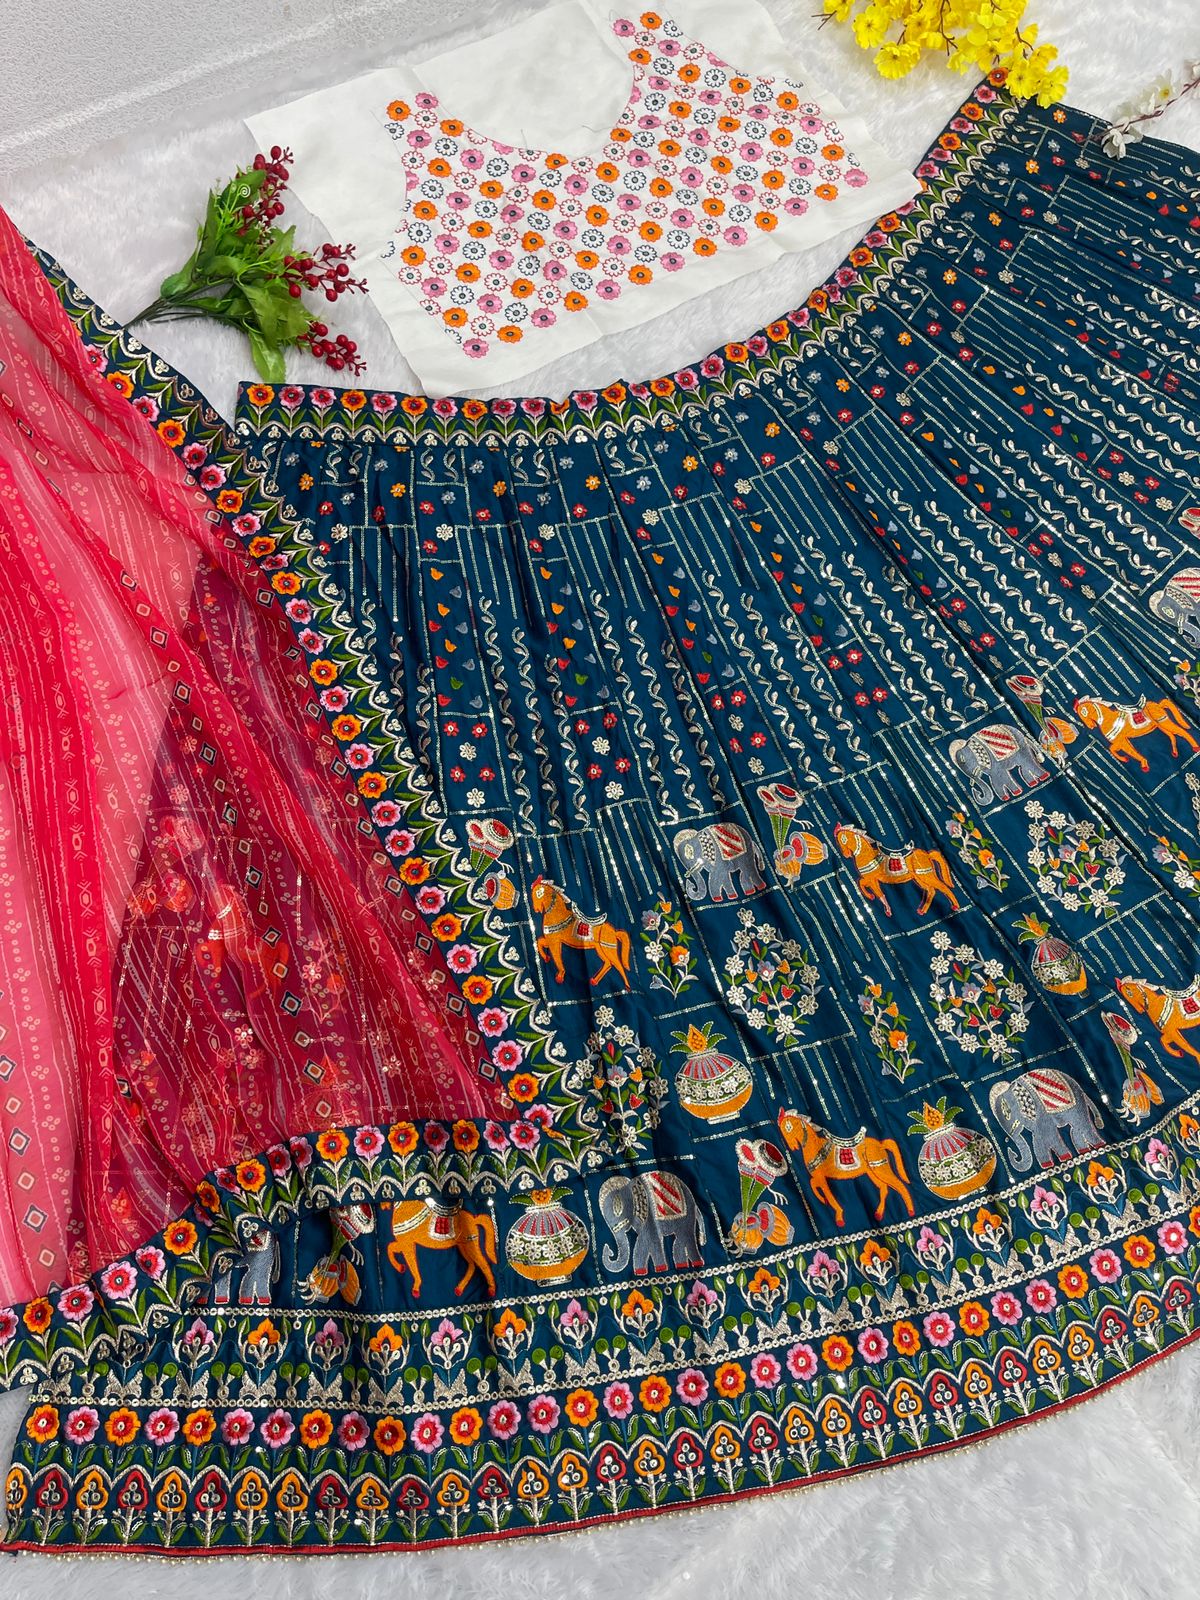 BridalShopping: Where To Buy Gota Patti Lehenga From? – All About Weddings